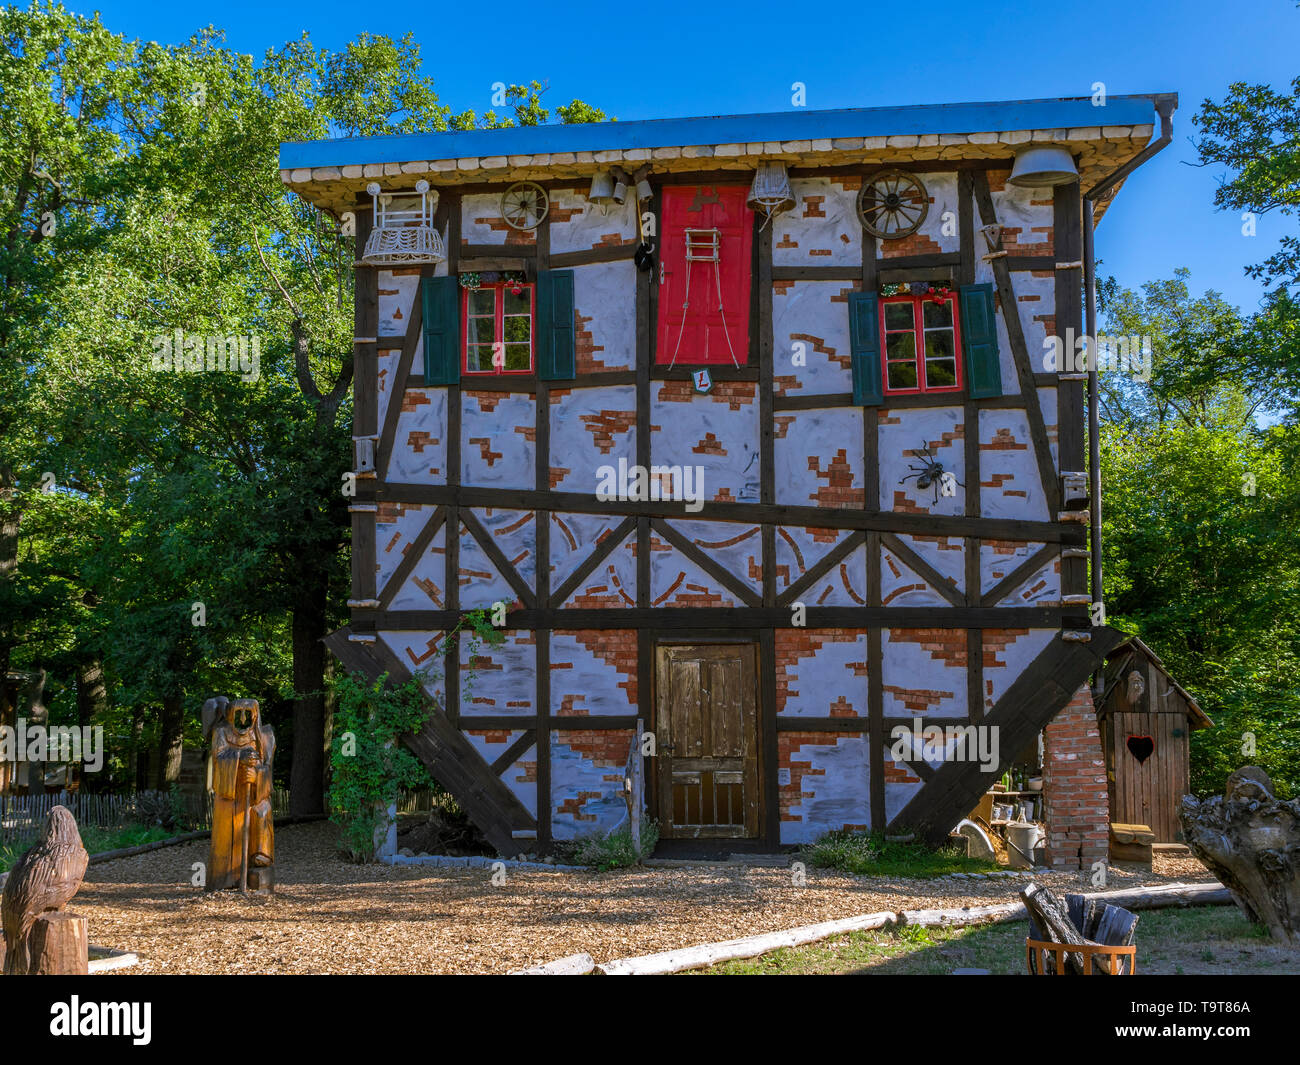 Witch's house in the witch's dance floor with Thale, east resin, Saxony-Anhalt, Germany, Europe, Hexenhaus am Hexentanzplatz bei Thale, Ostharz, Sachs Stock Photo